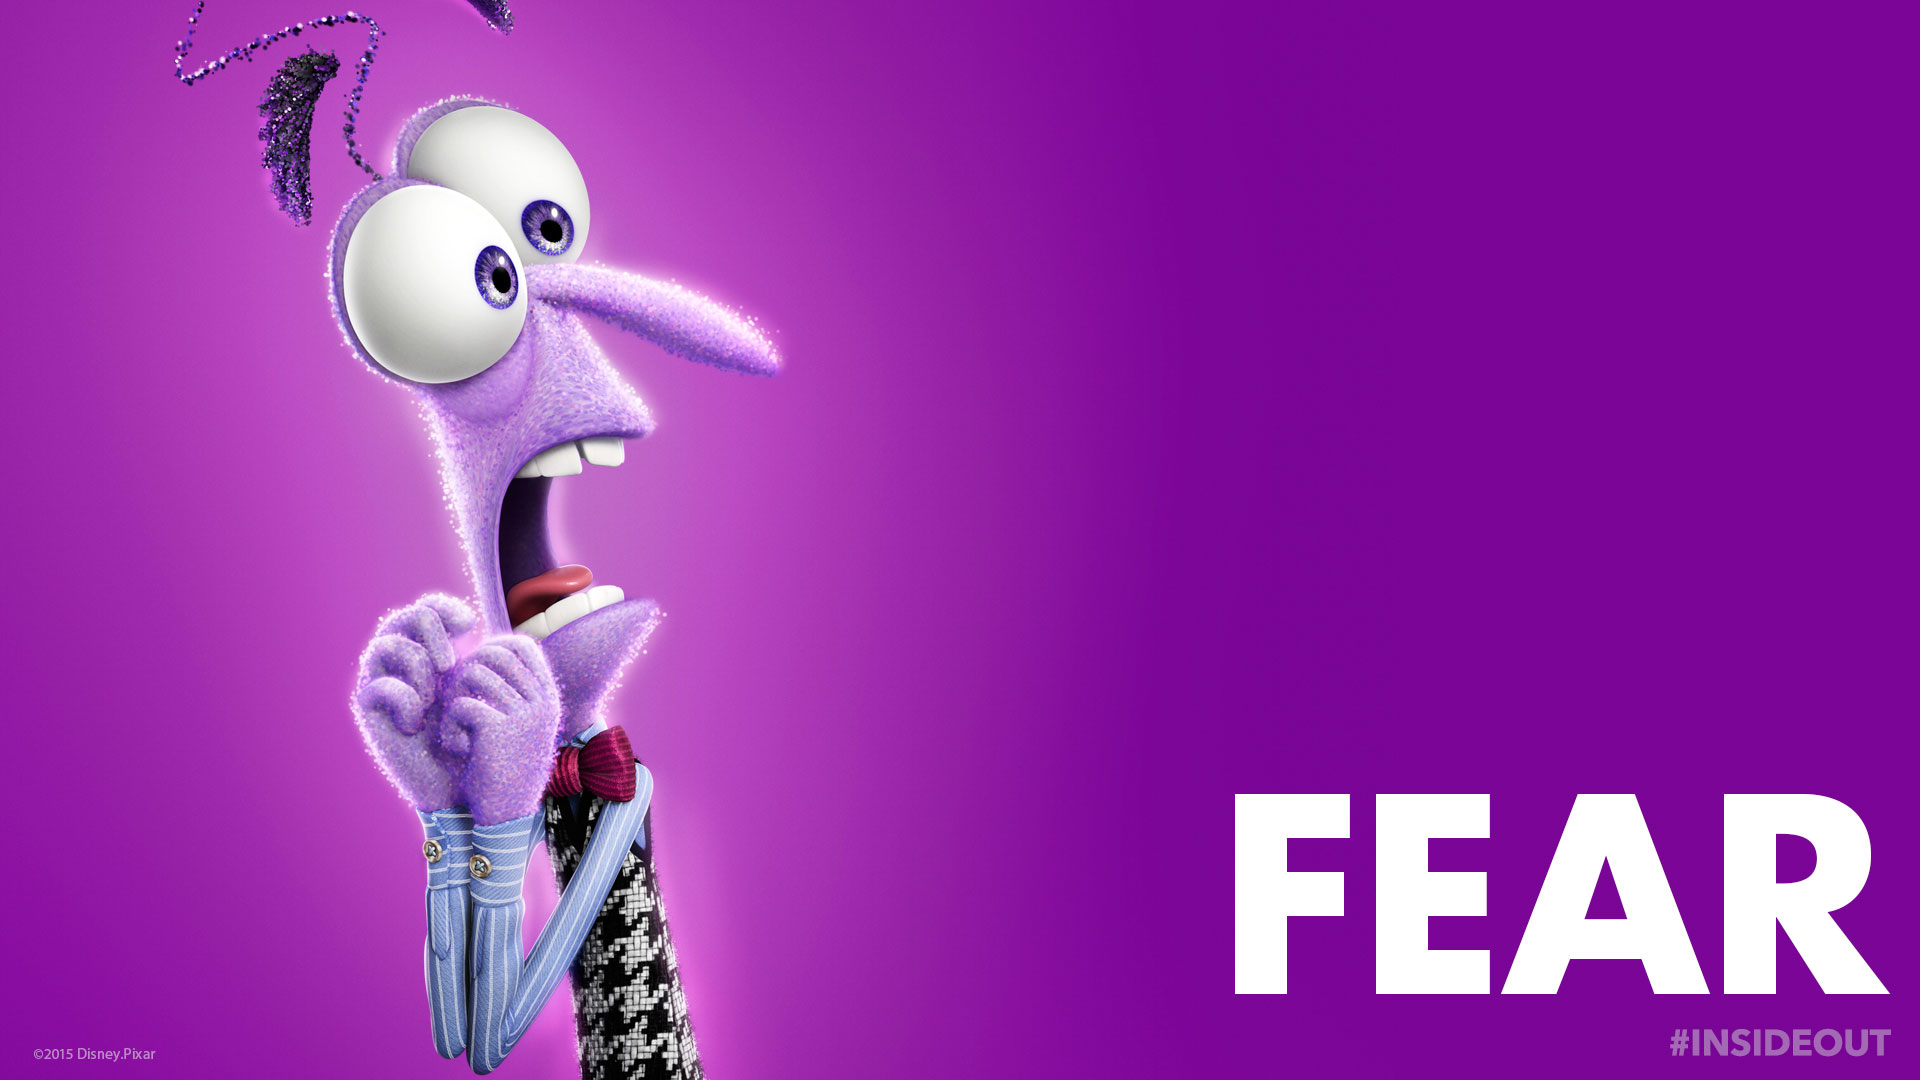  Movie Inside Out 2015 Desktop Backgrounds iPhone 6 Wallpapers